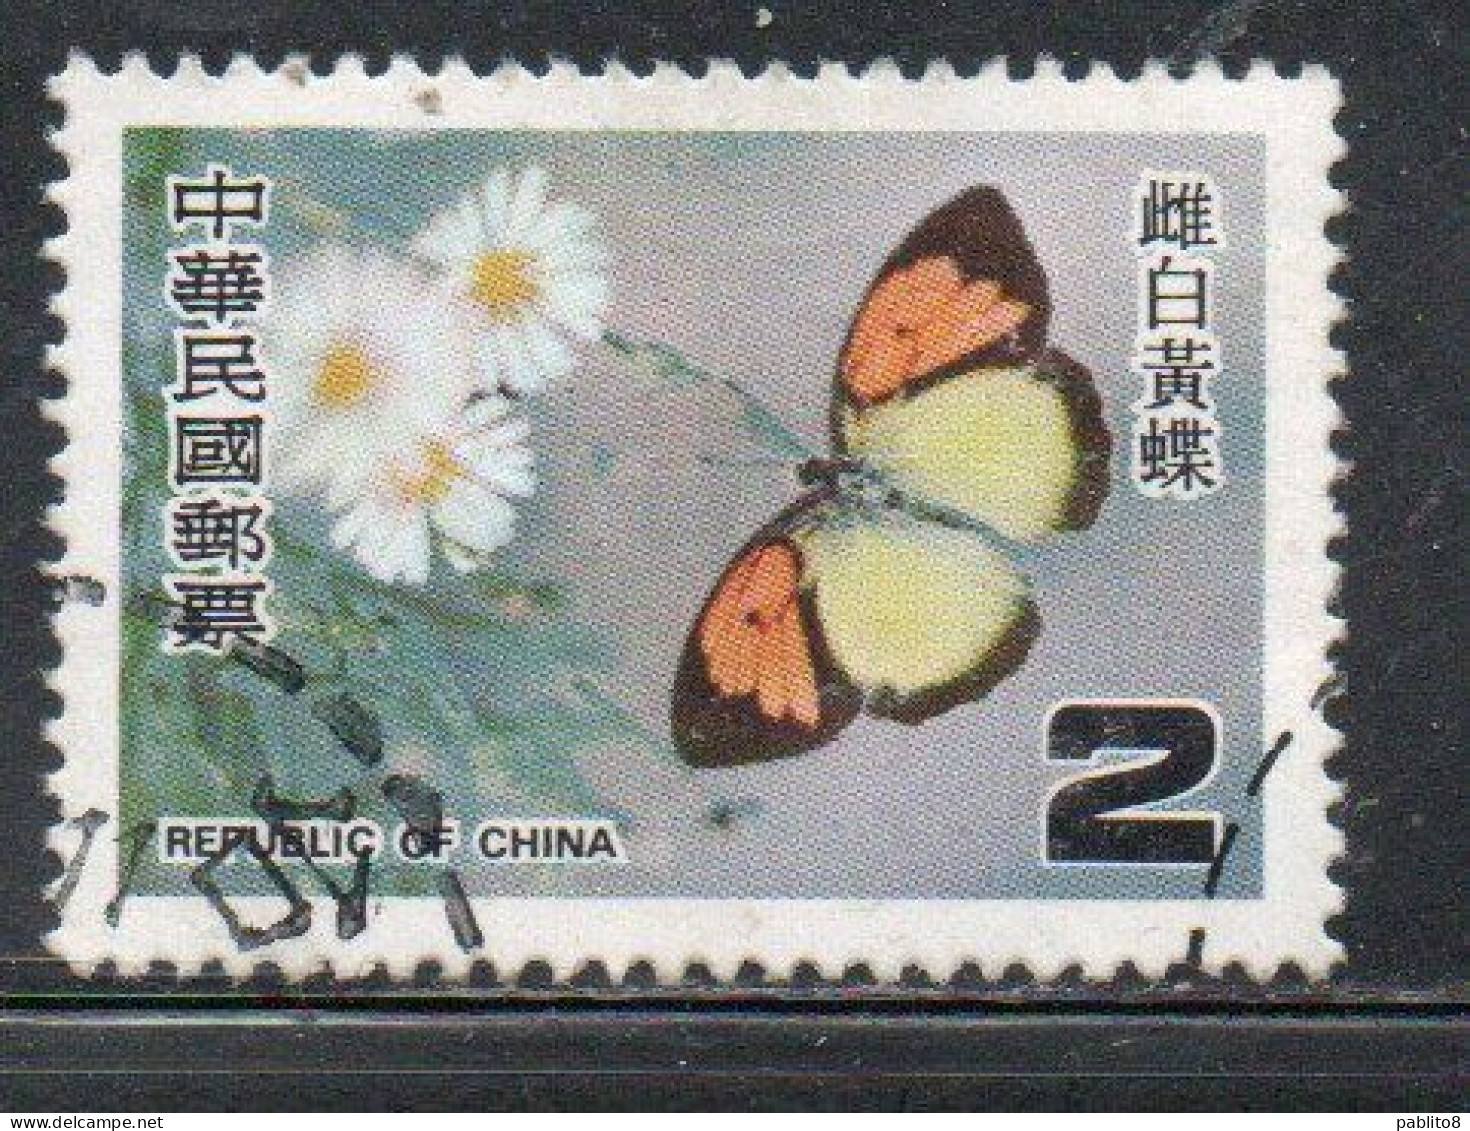 CHINA REPUBLIC CINA TAIWAN FORMOSA 1978 PROTECTED BUTTERFLIES IXIAS PYRENE BUTTERFLY 2$ USED USATO OBLITERE' - Gebraucht